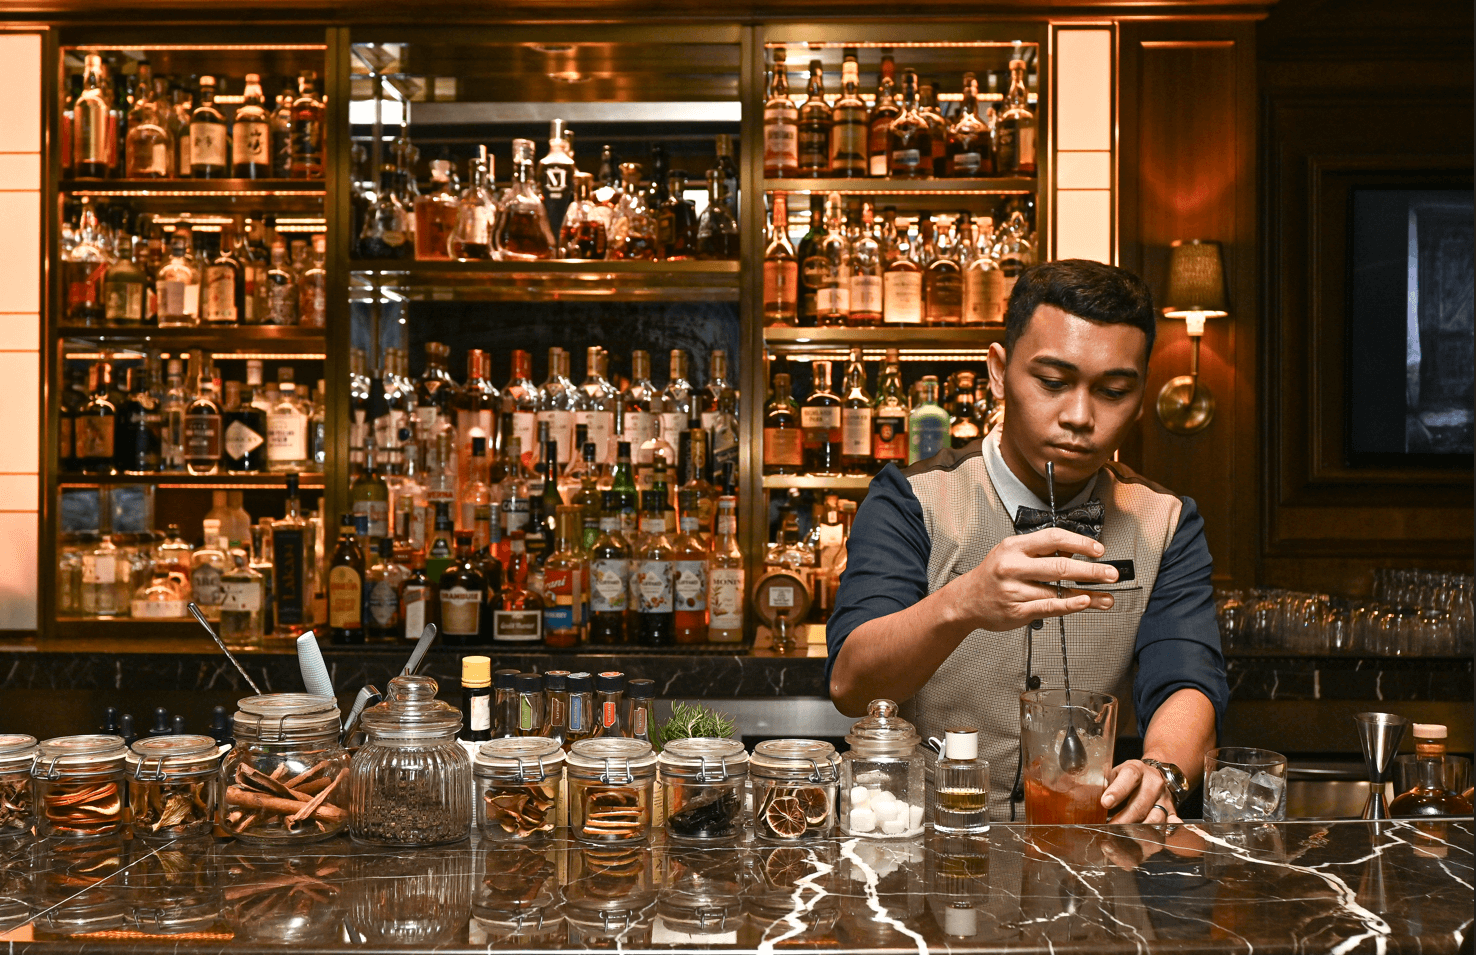 Klarenz Tagbago, the bar's other main mixologist of Solaire Baccarat Room and Bar